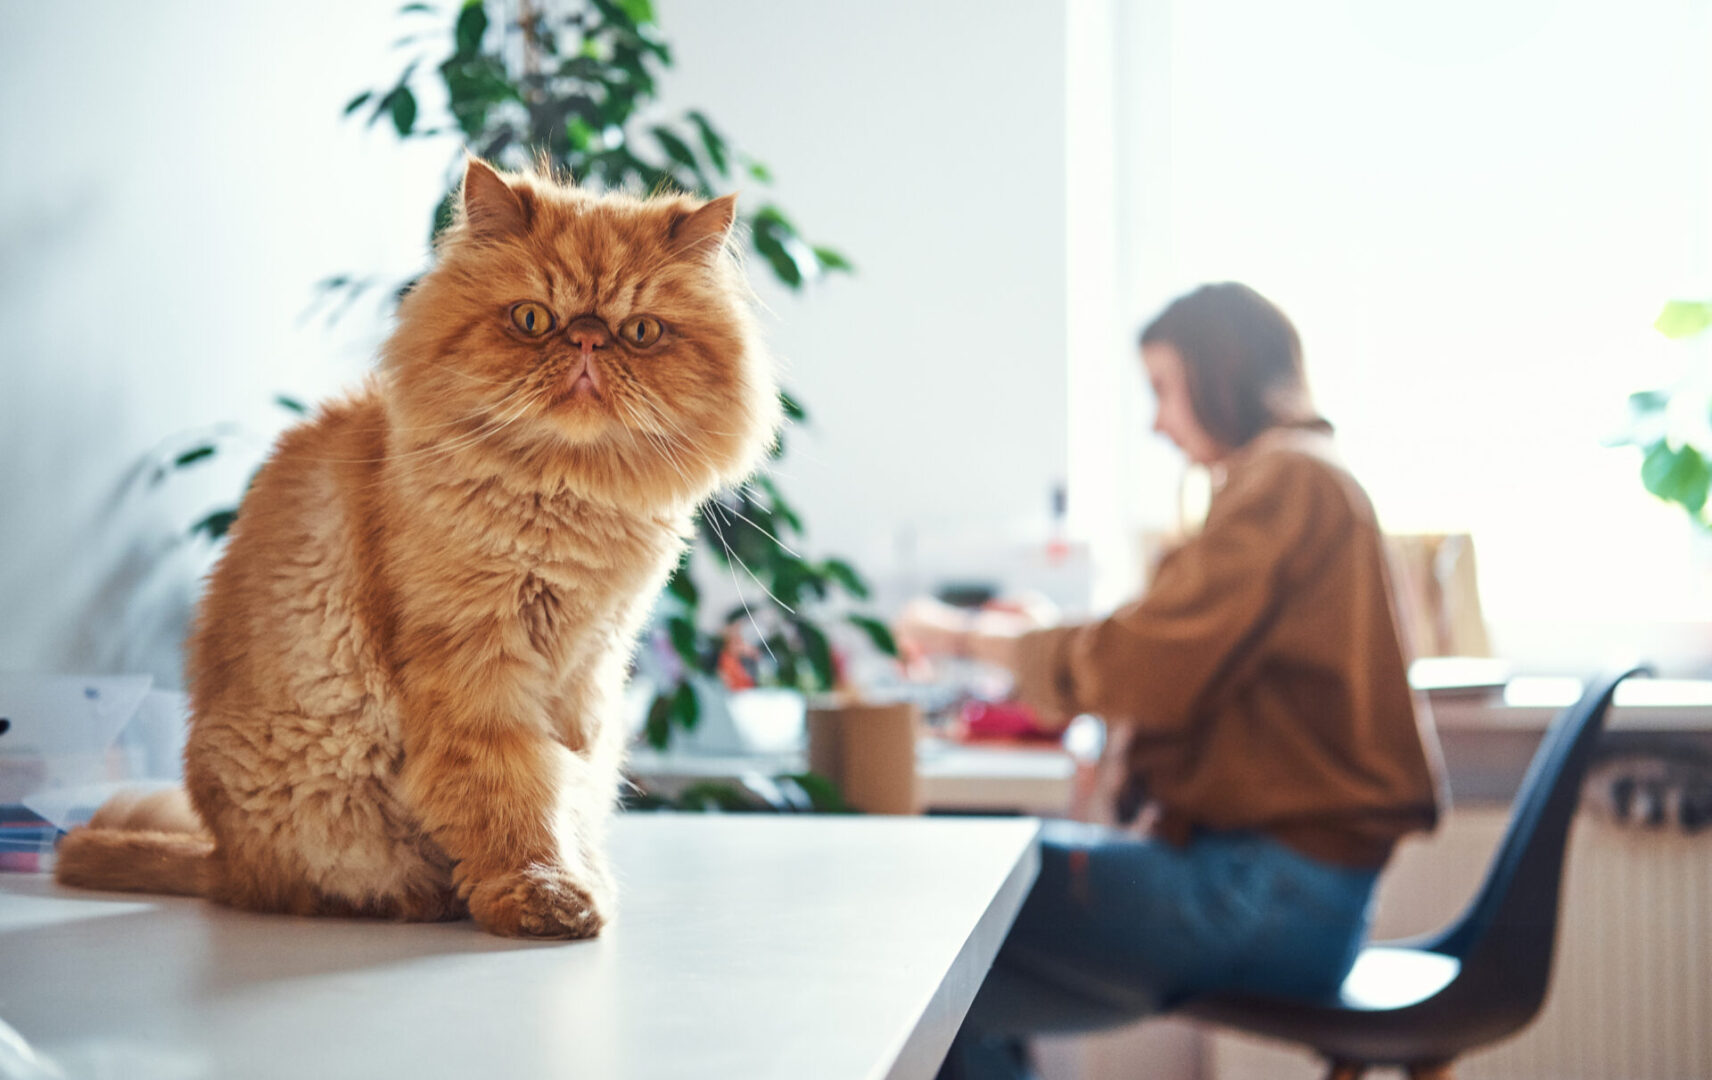 Cute ginger cat is sitting on the table while his mistress is working at the table.